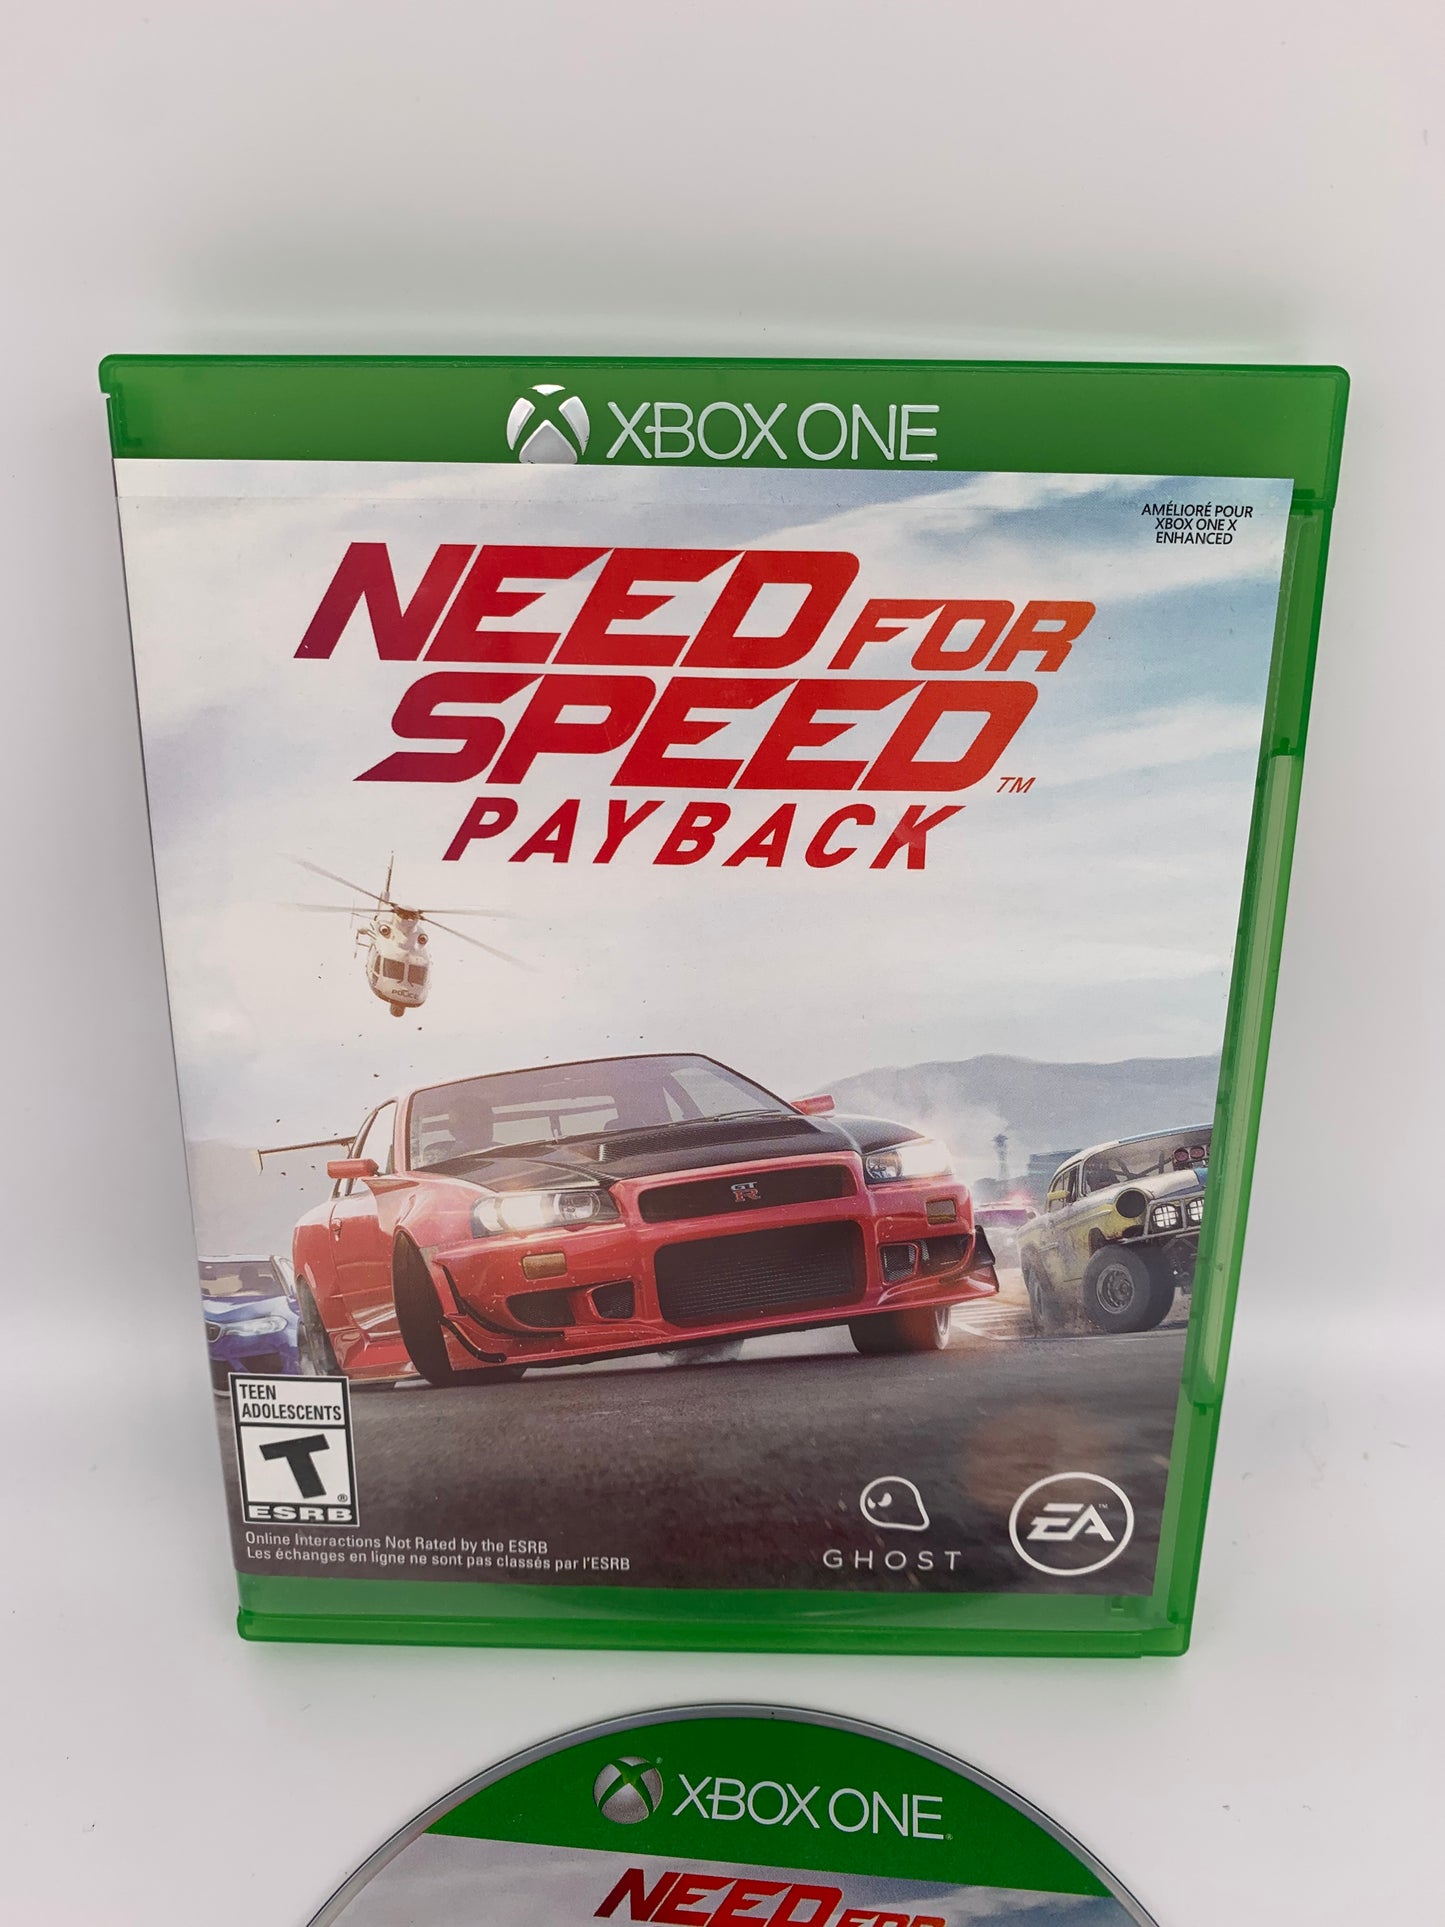 MiCROSOFT XBOX ONE | NEED FOR SPEED PAYBACK